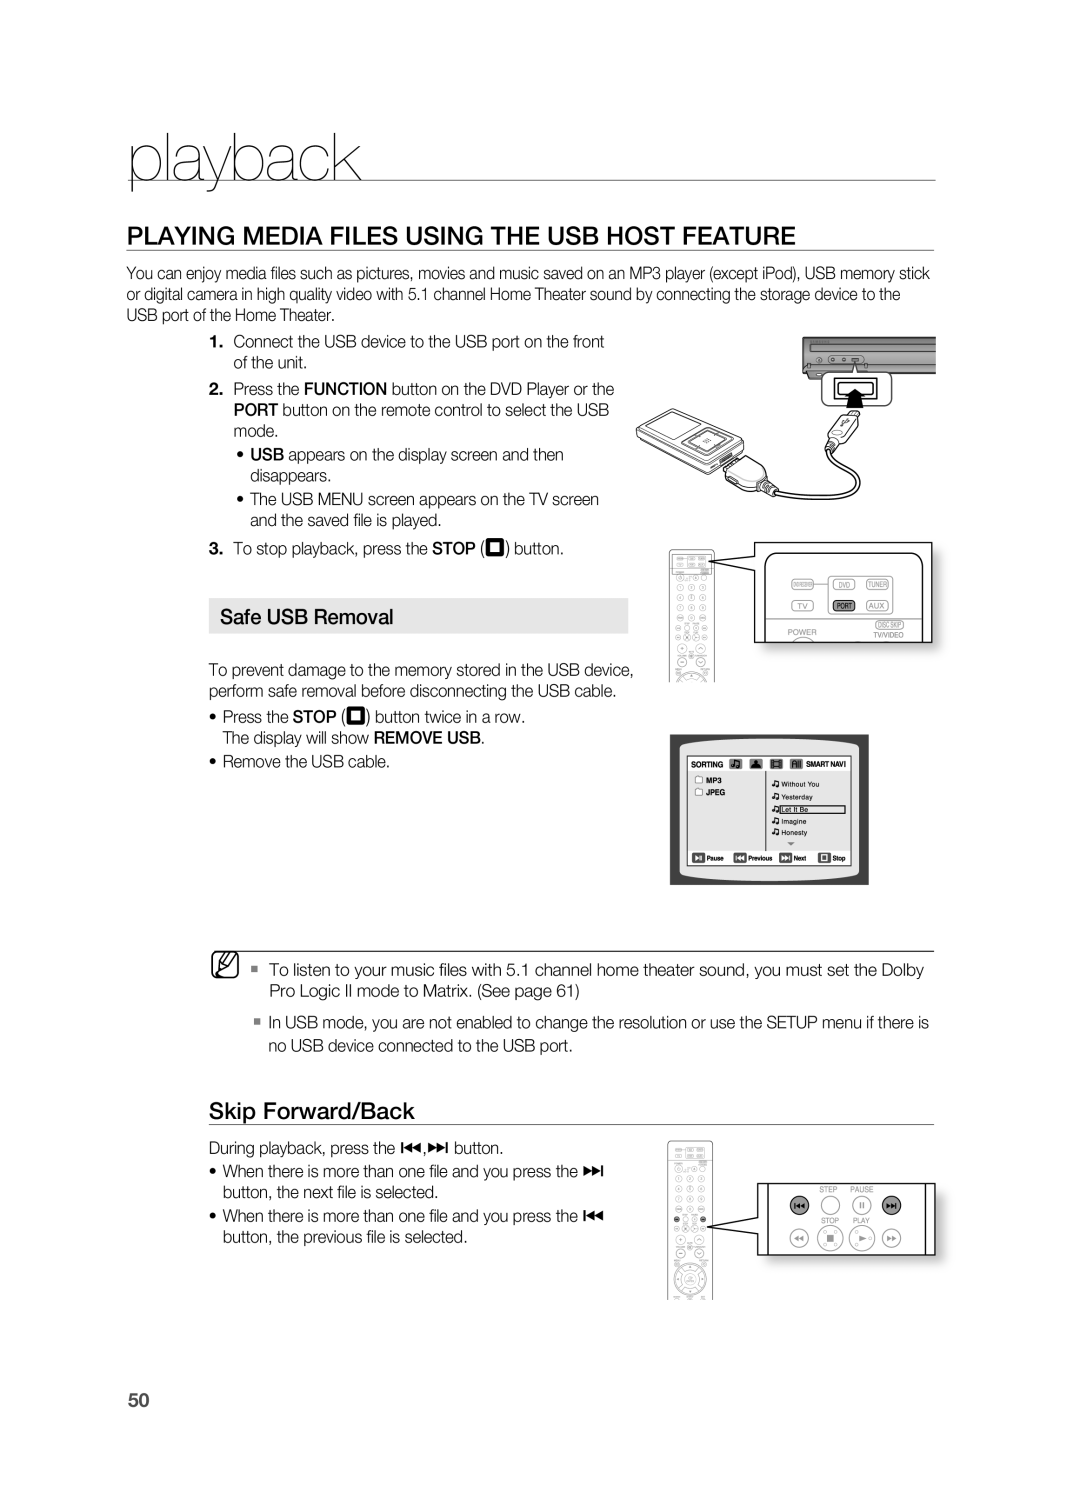 Samsung HT-Z510 manual PLAYINg MEDIA FILES USINg THE USB HOST FEATUrE, playback, Safe USB removal 